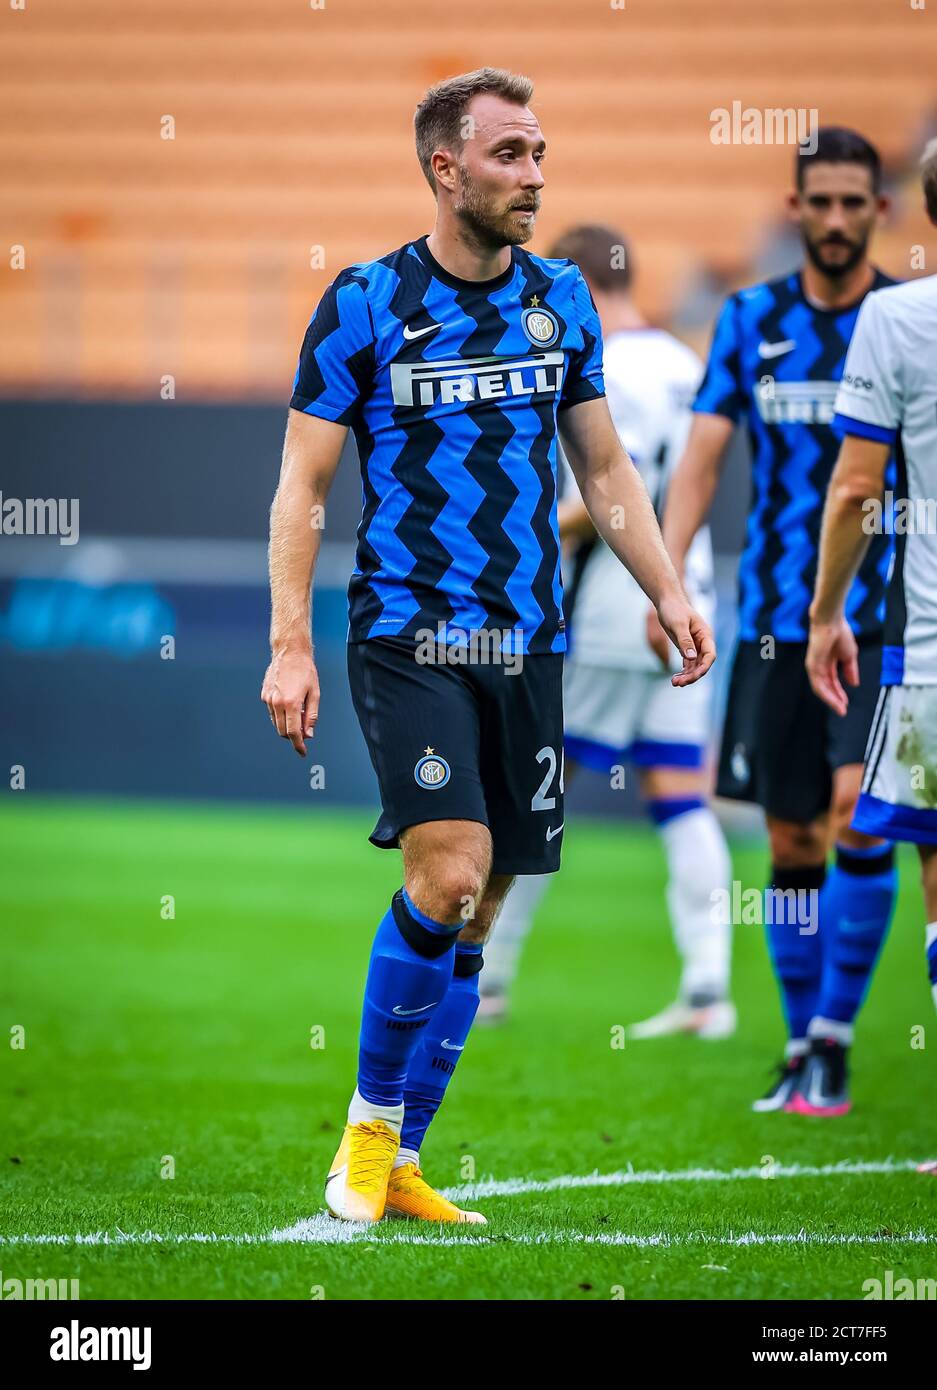 Milan, Italy. 19th Sep, 2020. Christian Eriksen of FC Internazionale during the Friendly Match Pre-Season 2020/21 between FC Internazionale vs AC Pisa 1909 at the San Siro Stadium, Milan, Italy on September 19, 2020 - Photo Fabrizio Carabelli/LM Credit: Fabrizio Carabelli/LPS/ZUMA Wire/Alamy Live News Stock Photo